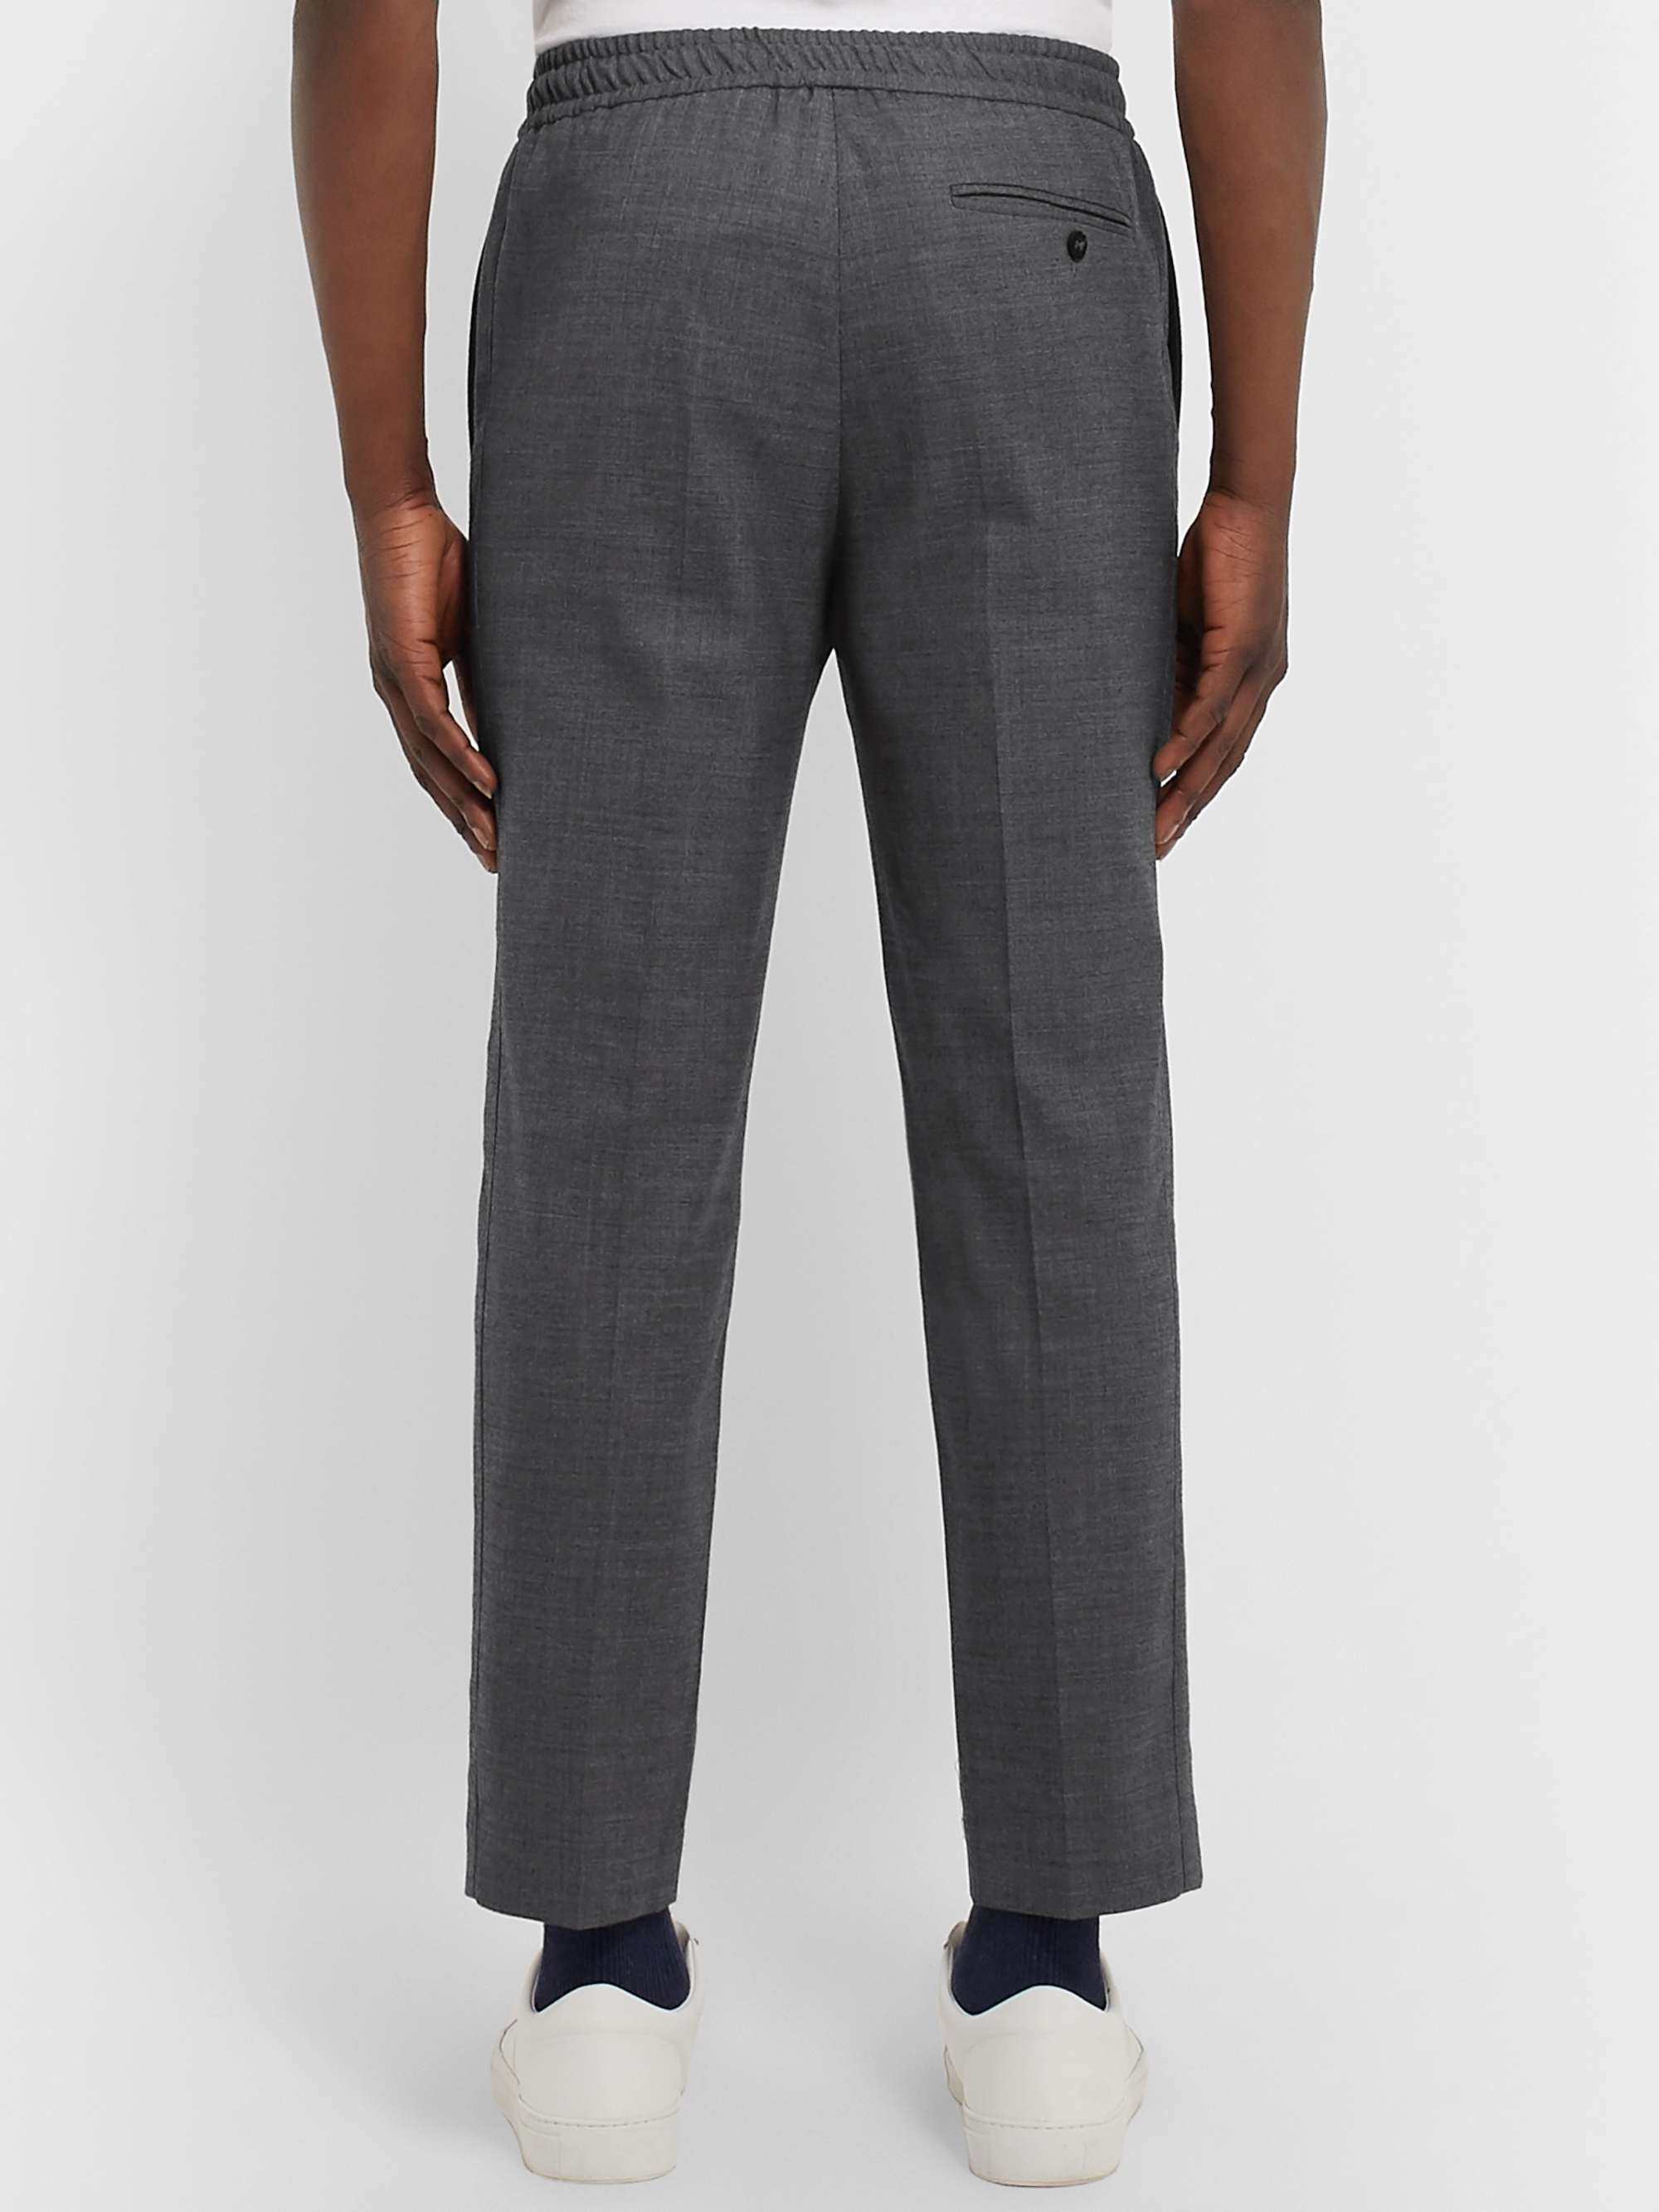 MR P. Slim-Fit Grey Stretch Wool and Cotton-Blend Drawstring Trousers